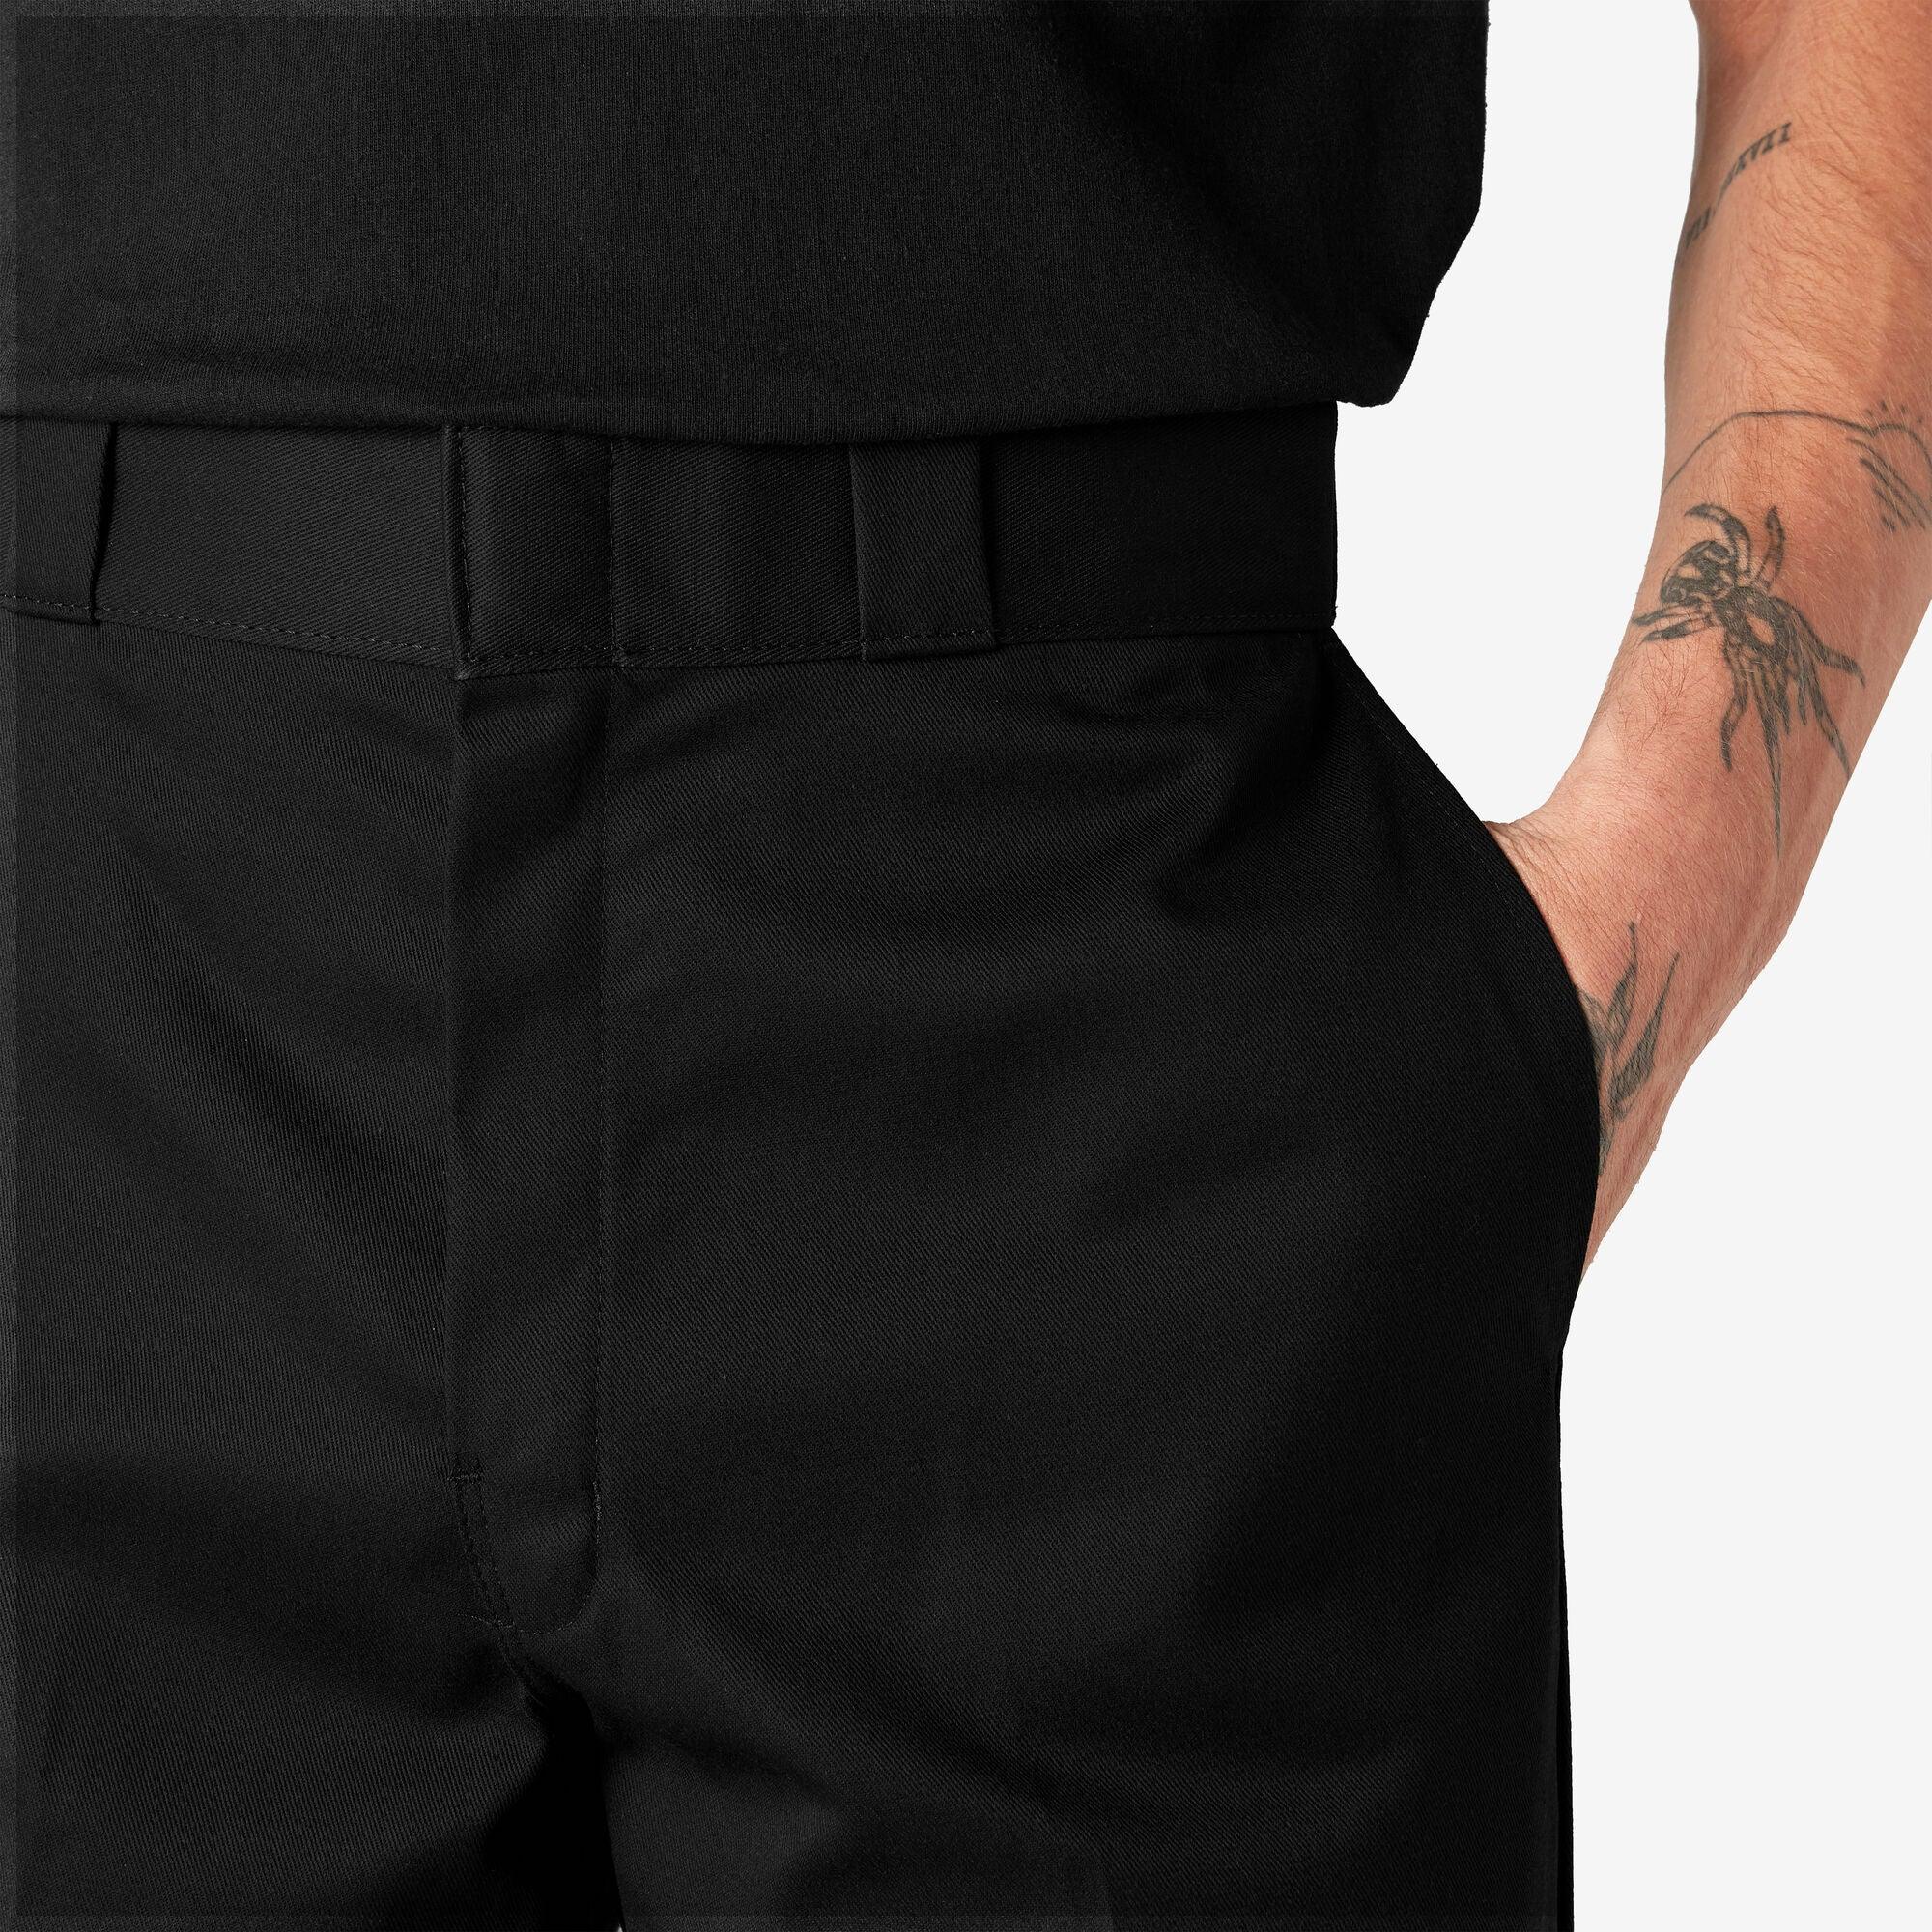 Loose Fit Double Knee Work Pants, Black - Purpose-Built / Home of the Trades